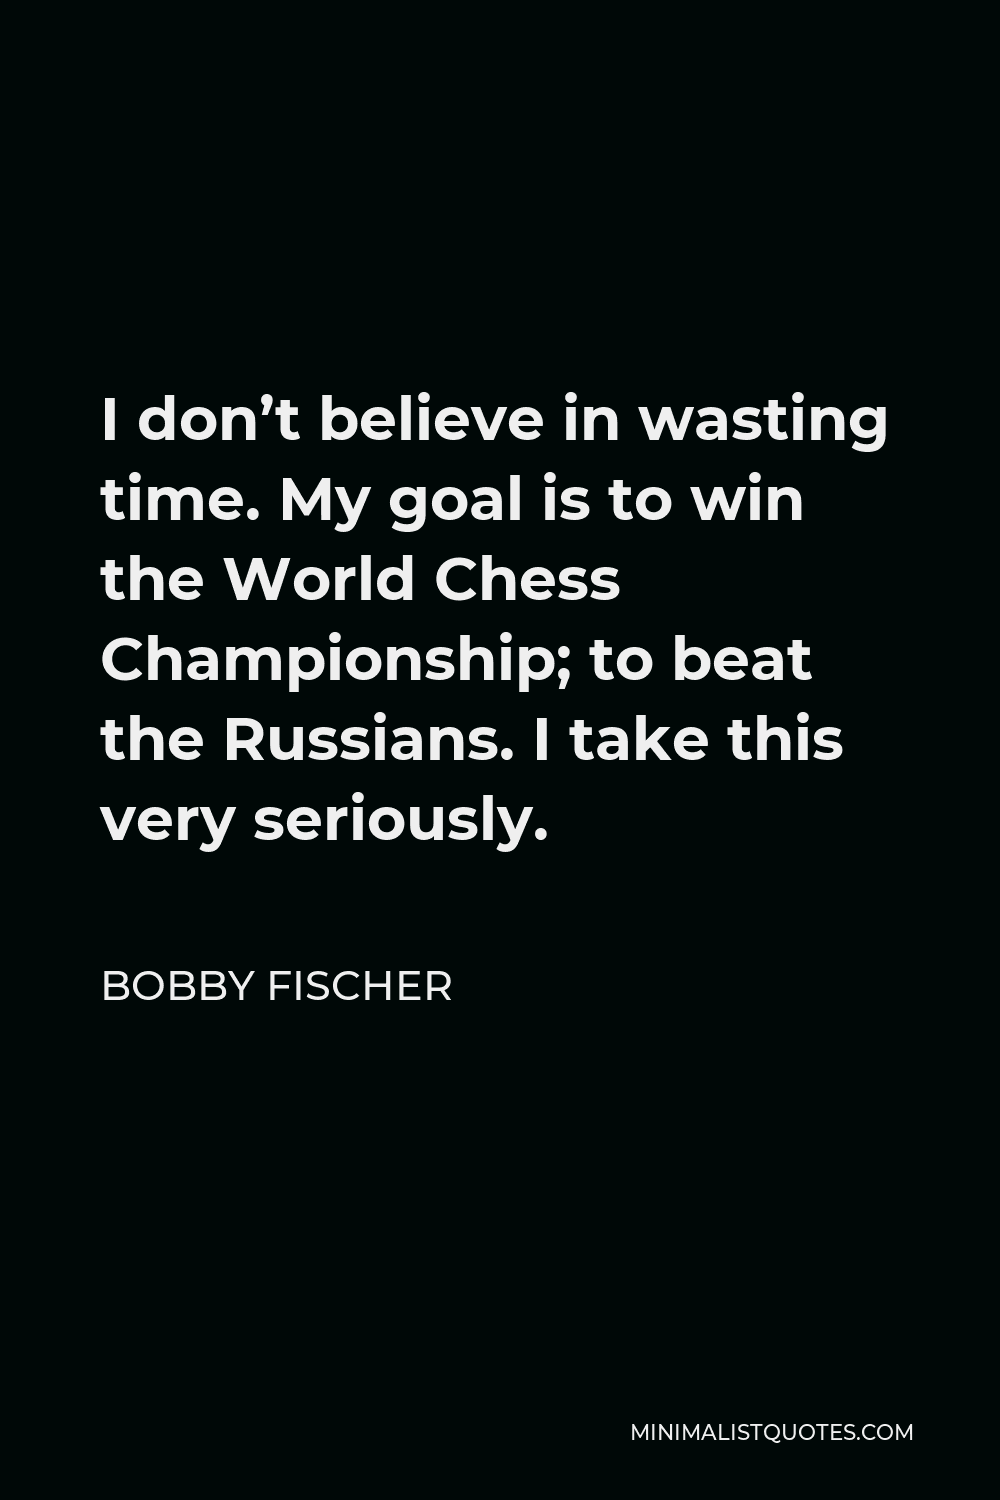 Bobby Fischer Quote - I don’t believe in wasting time. My goal is to win the World Chess Championship; to beat the Russians. I take this very seriously.